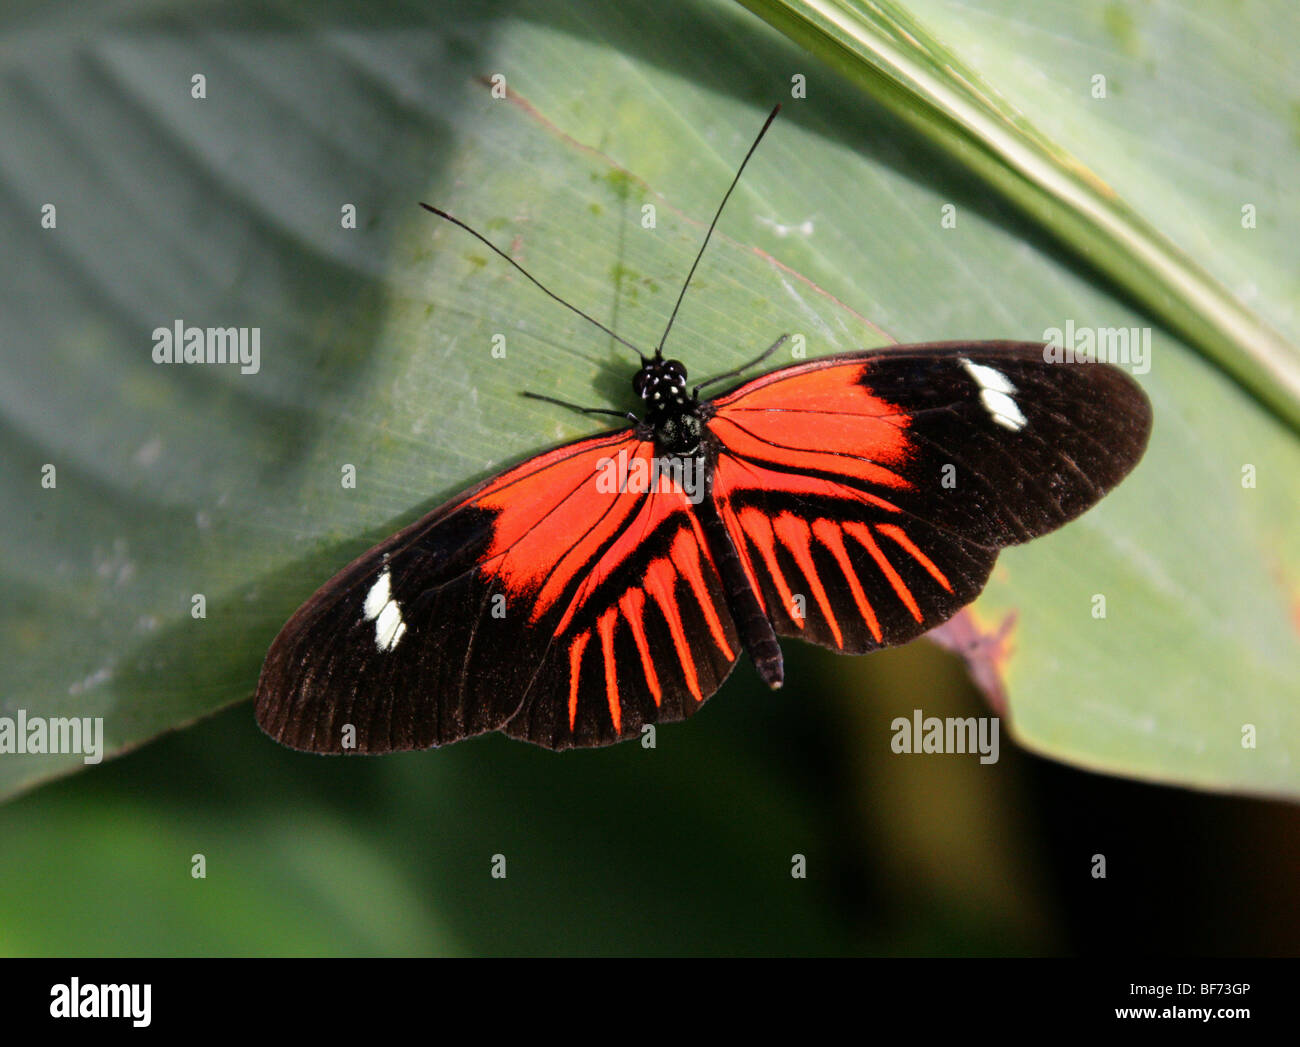 Postman Butterfly, Heliconius melpomene, Nymphalidae, South America Stock Photo